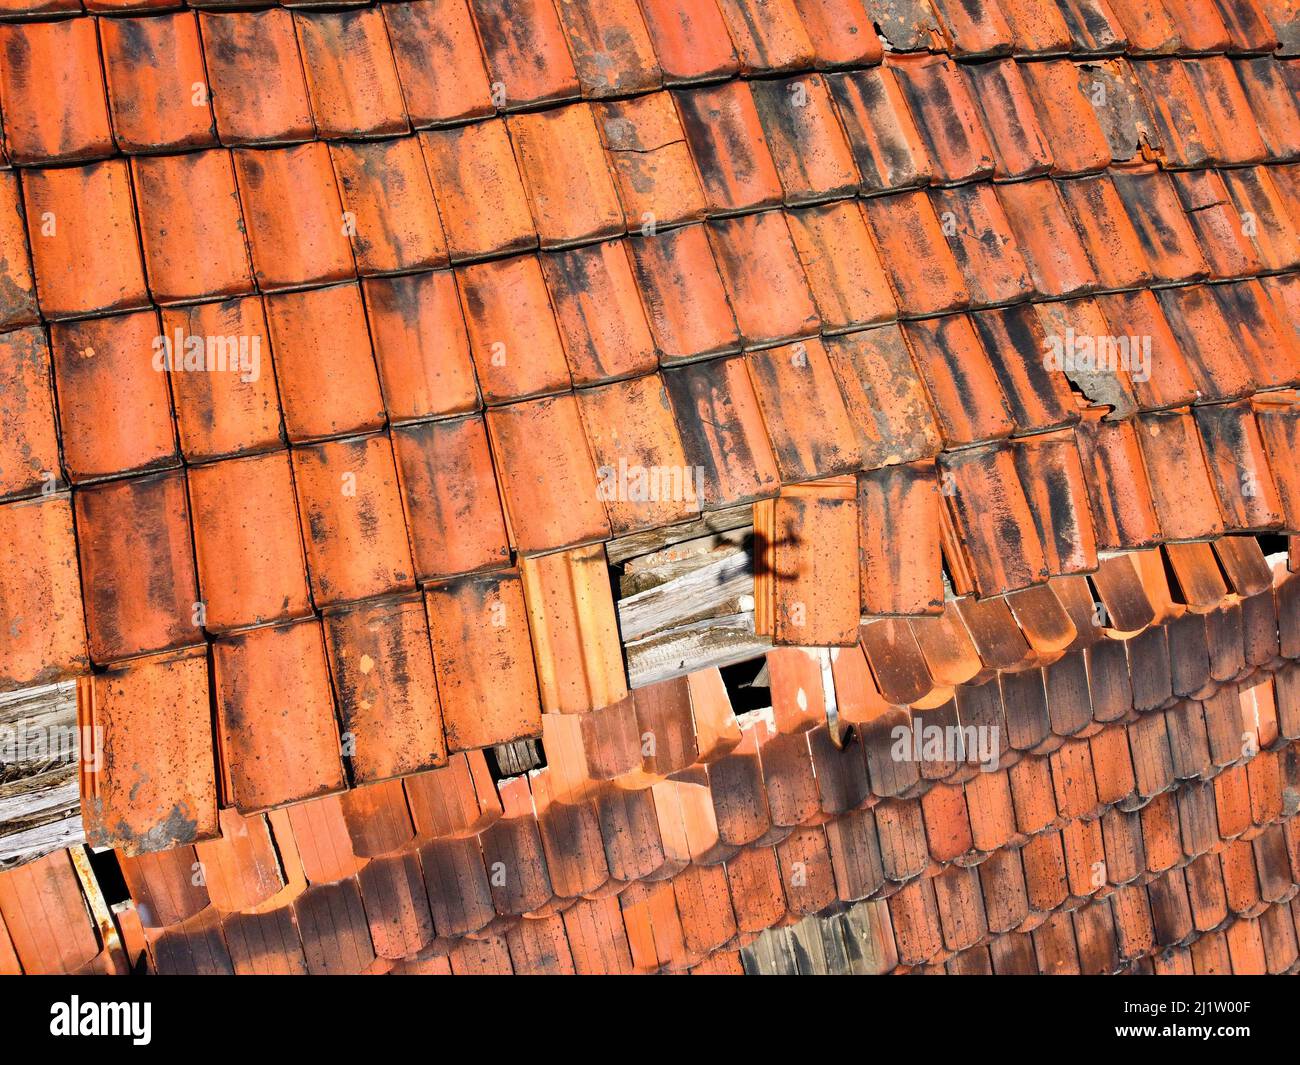 Storm damage to the roof tiles on the house Stock Photo